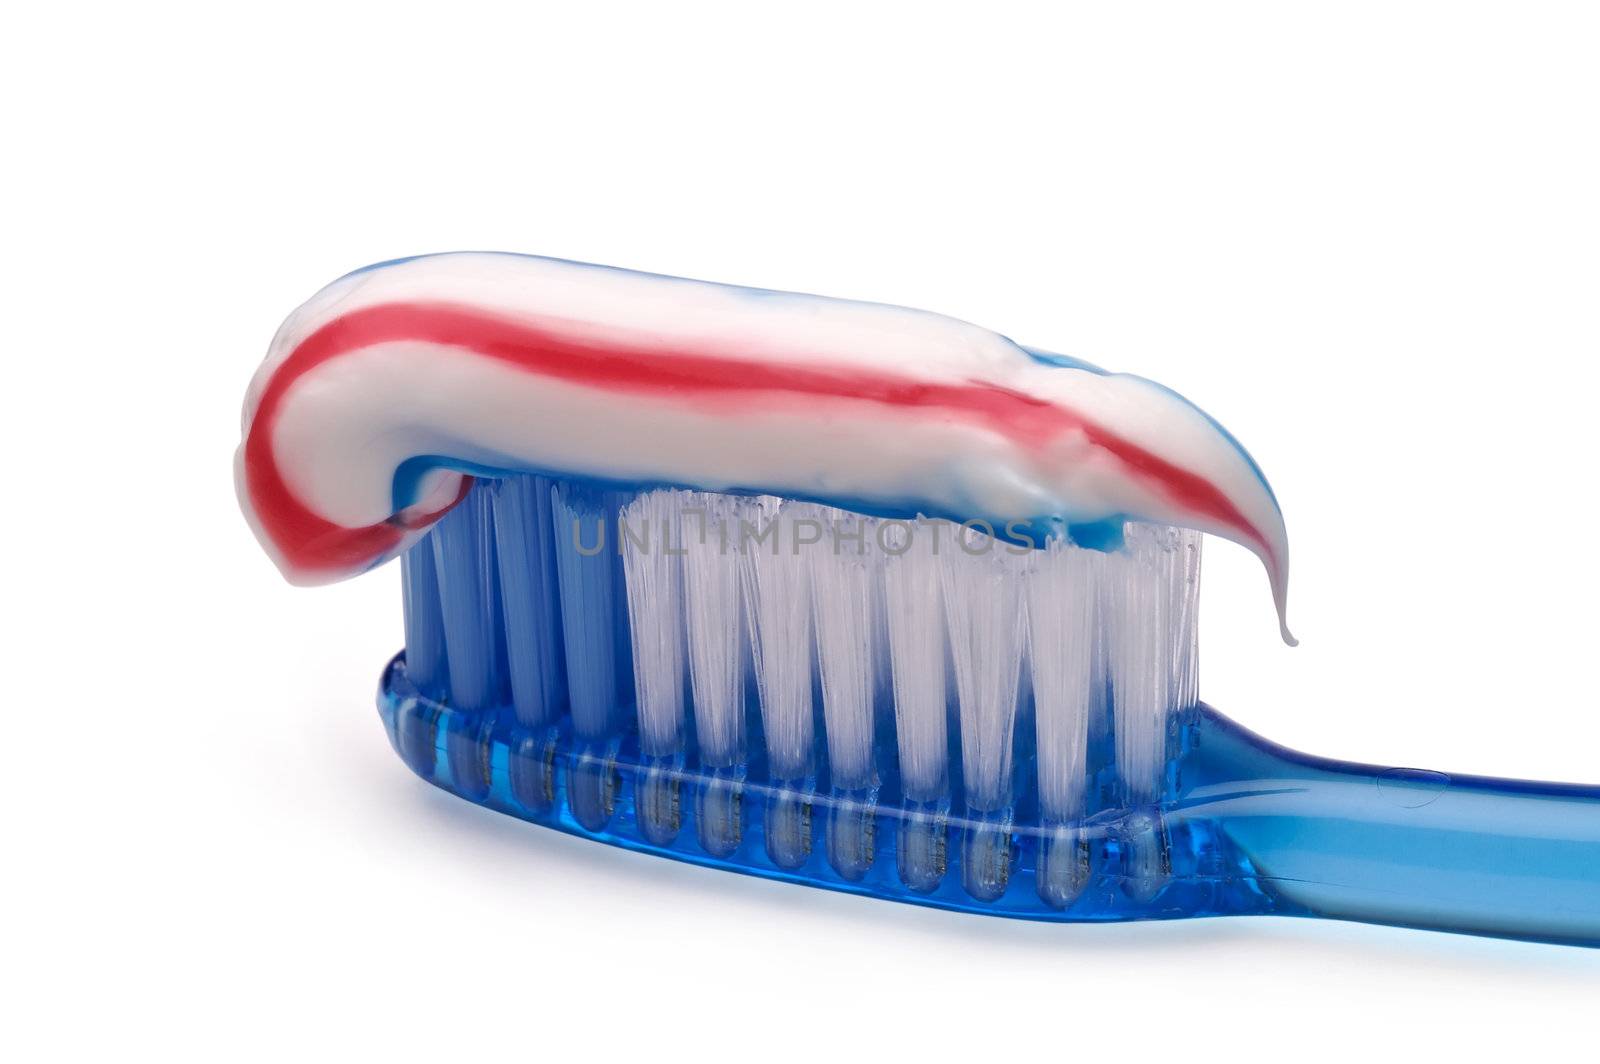 Translucent tooth brush with toothpaste w/ clipping path